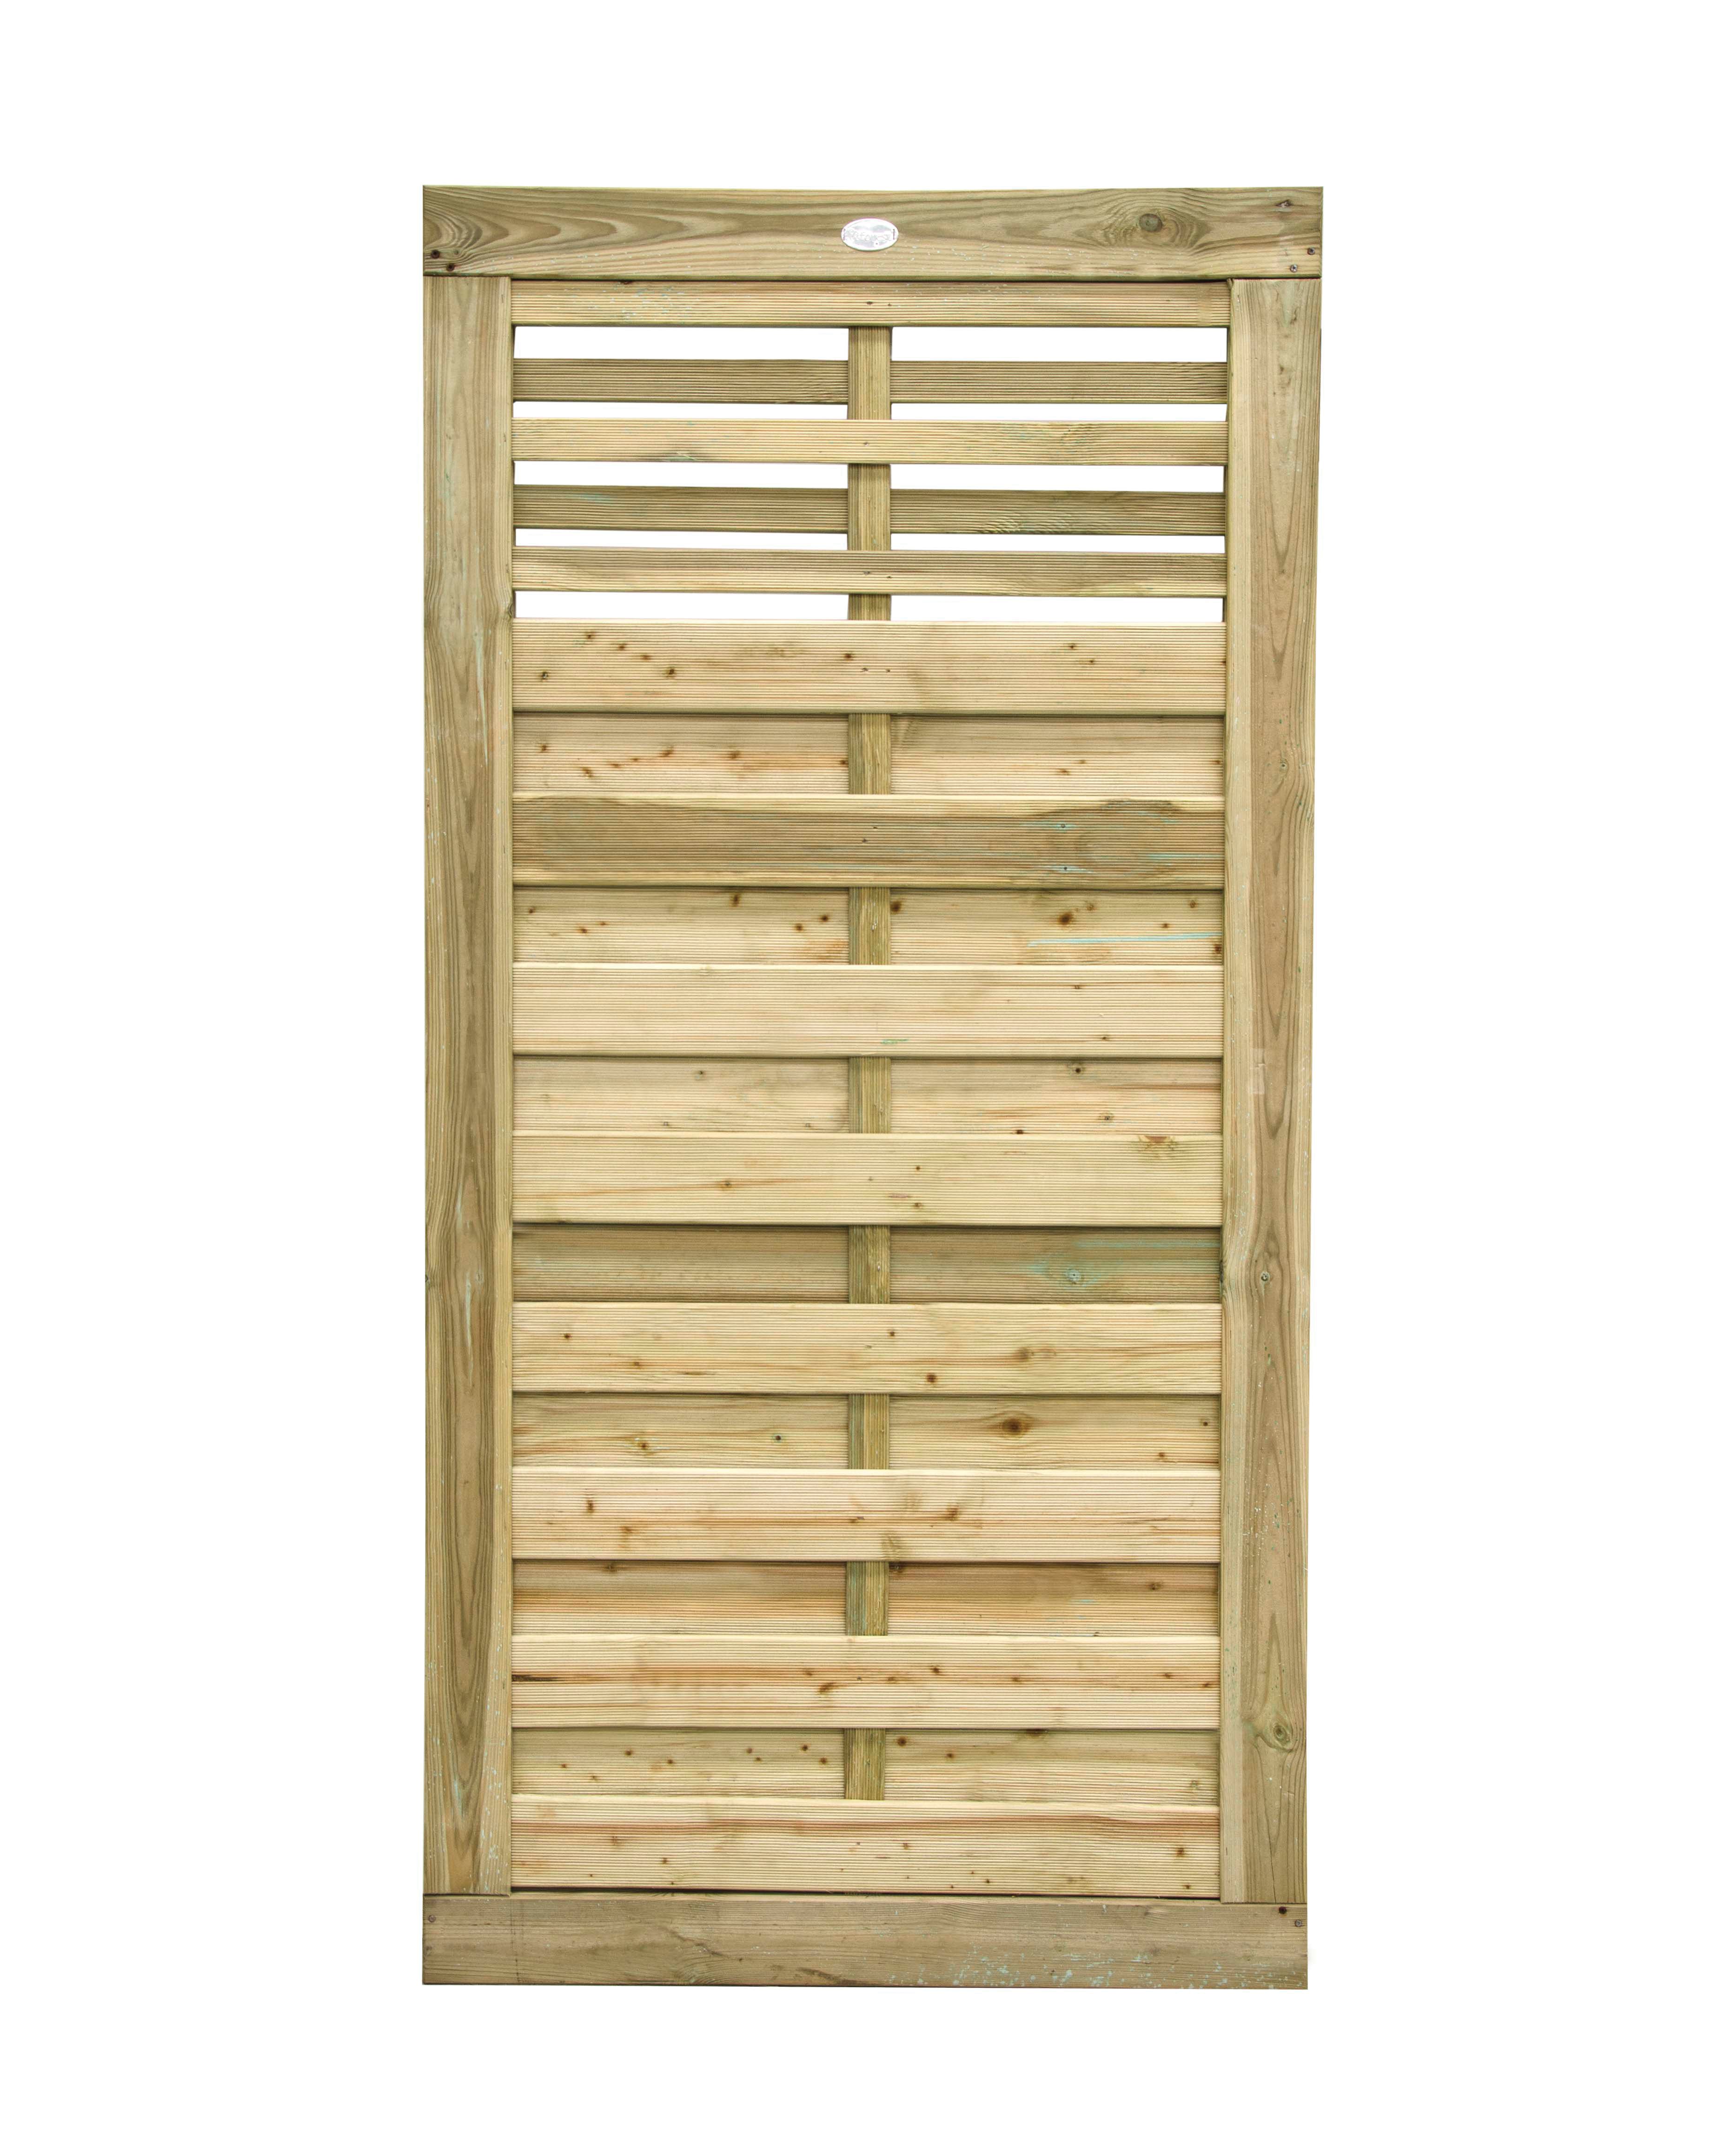 Forest Garden Kyoto Slatted Timber Gate - 900 x 1800mm